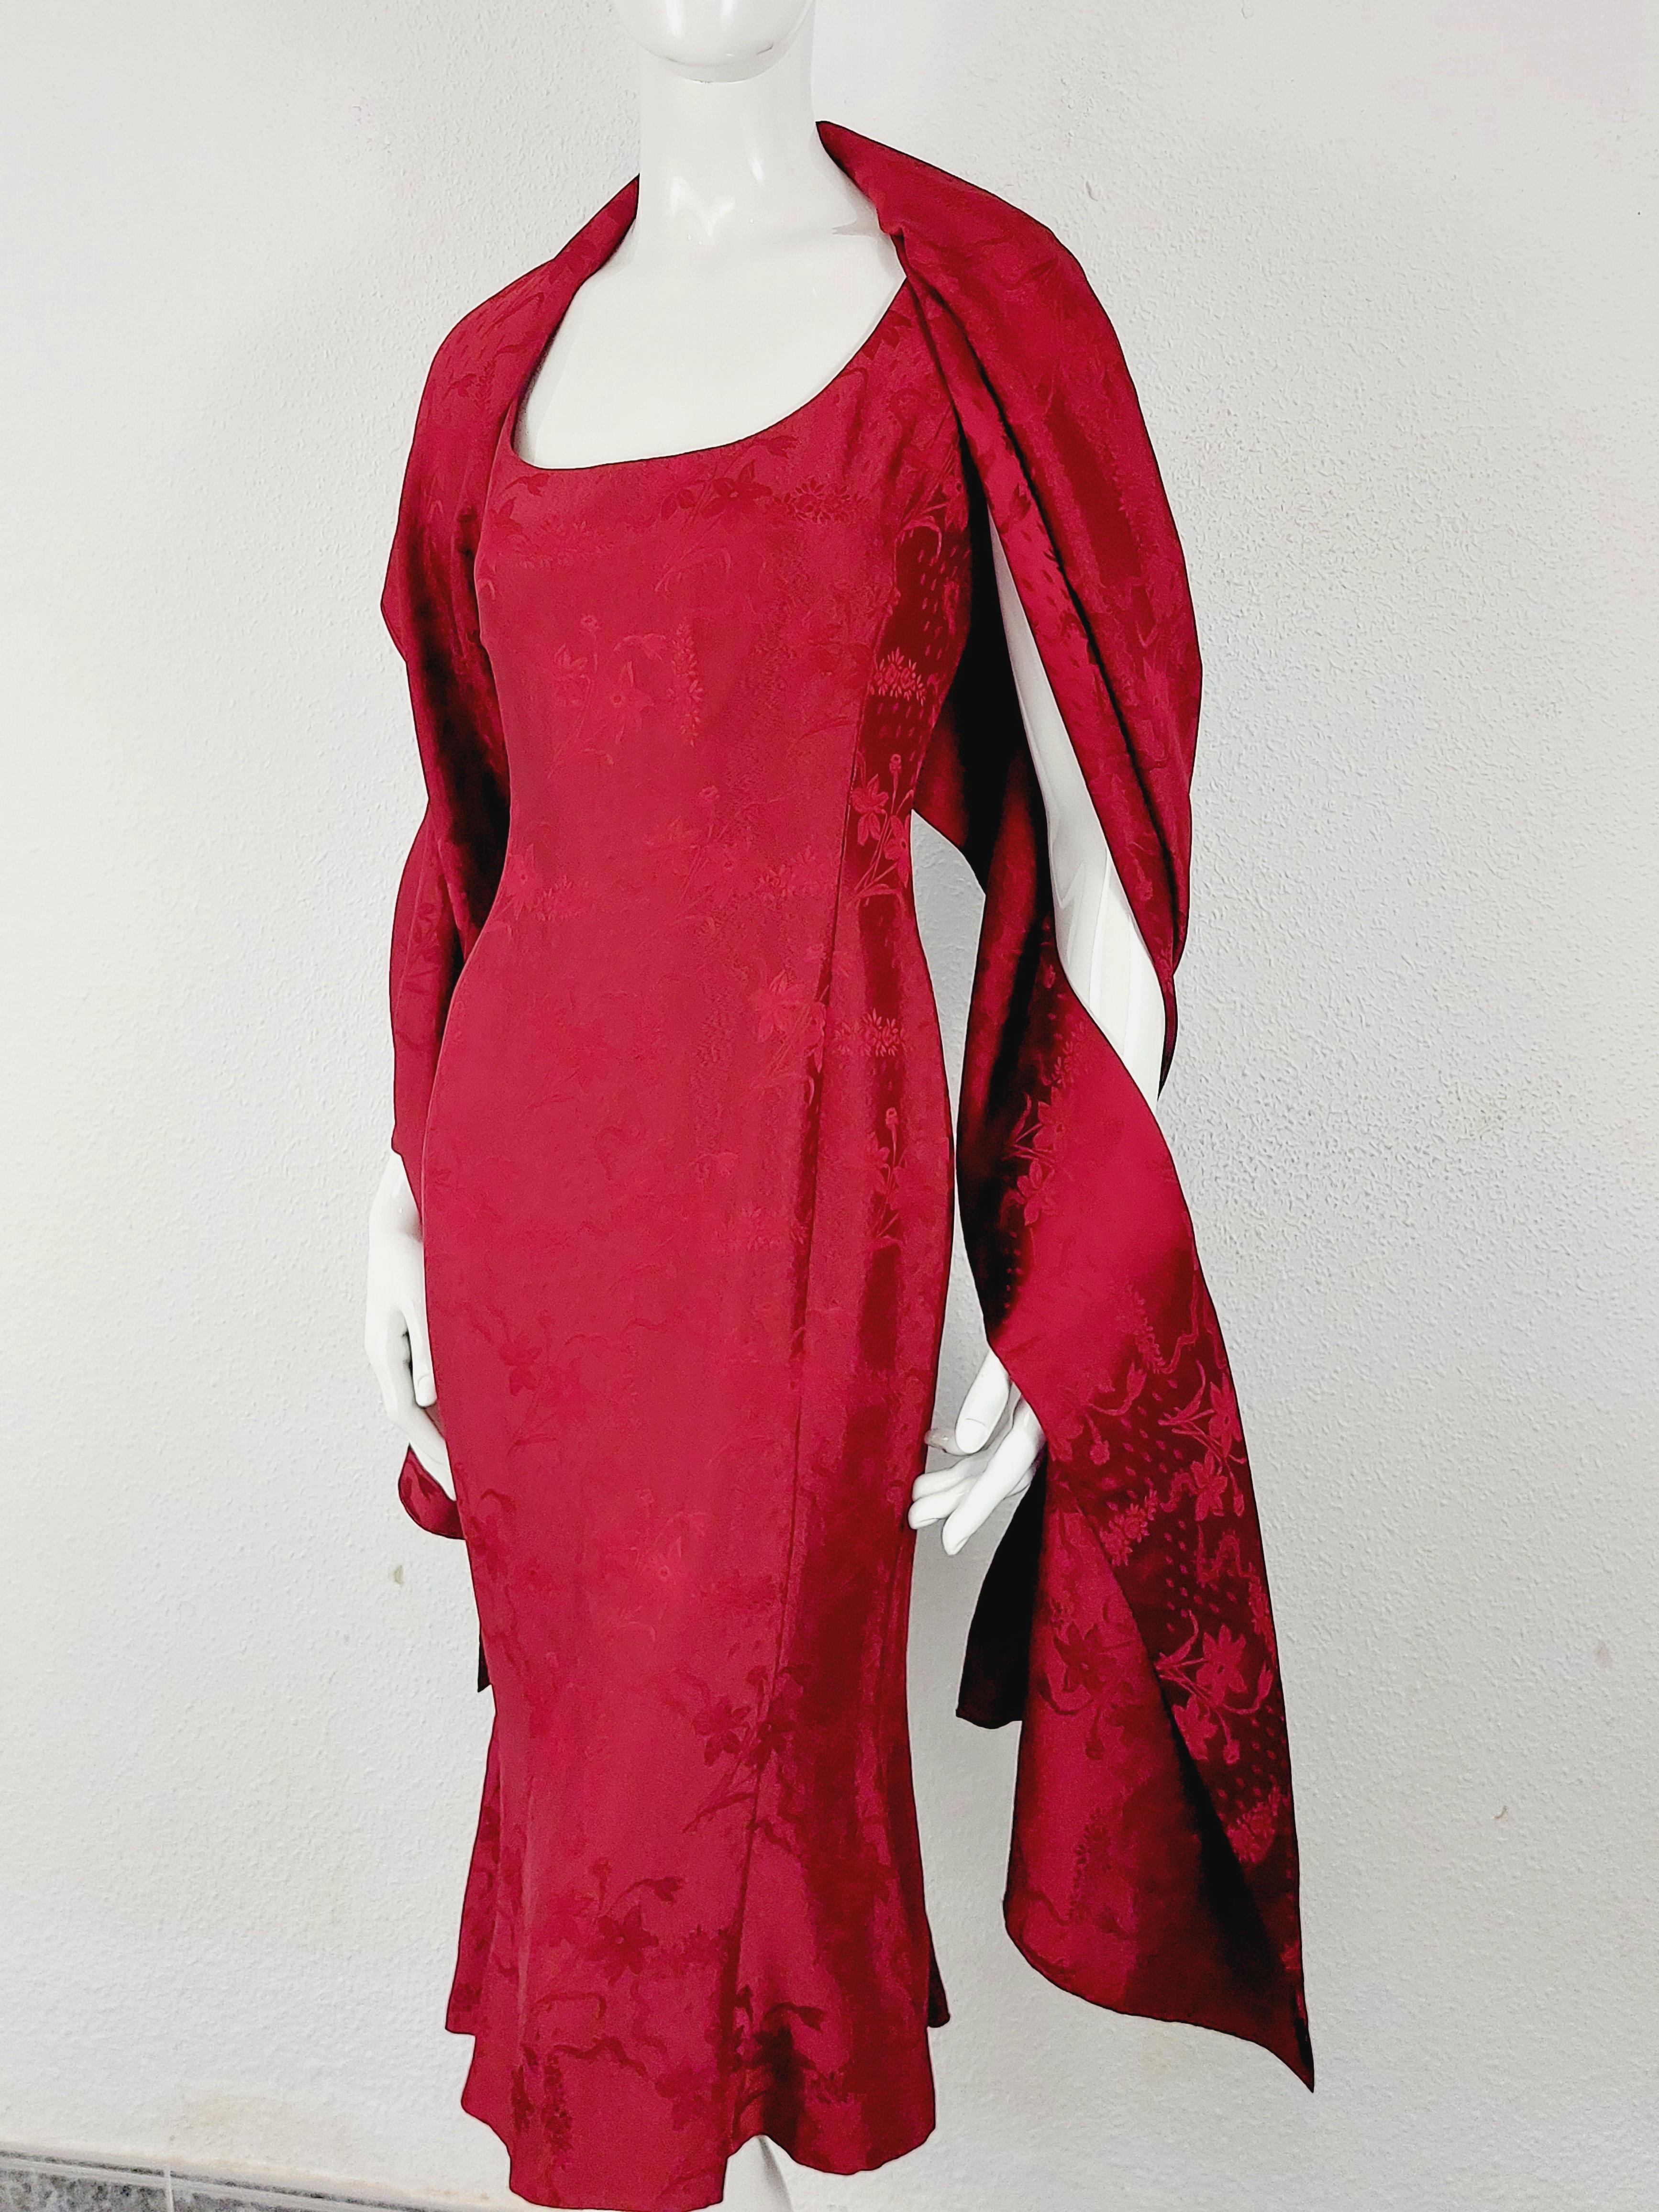 John Galliano London Red Silk Brocade Floral Runway Evening Gown Dress w Stola For Sale 13